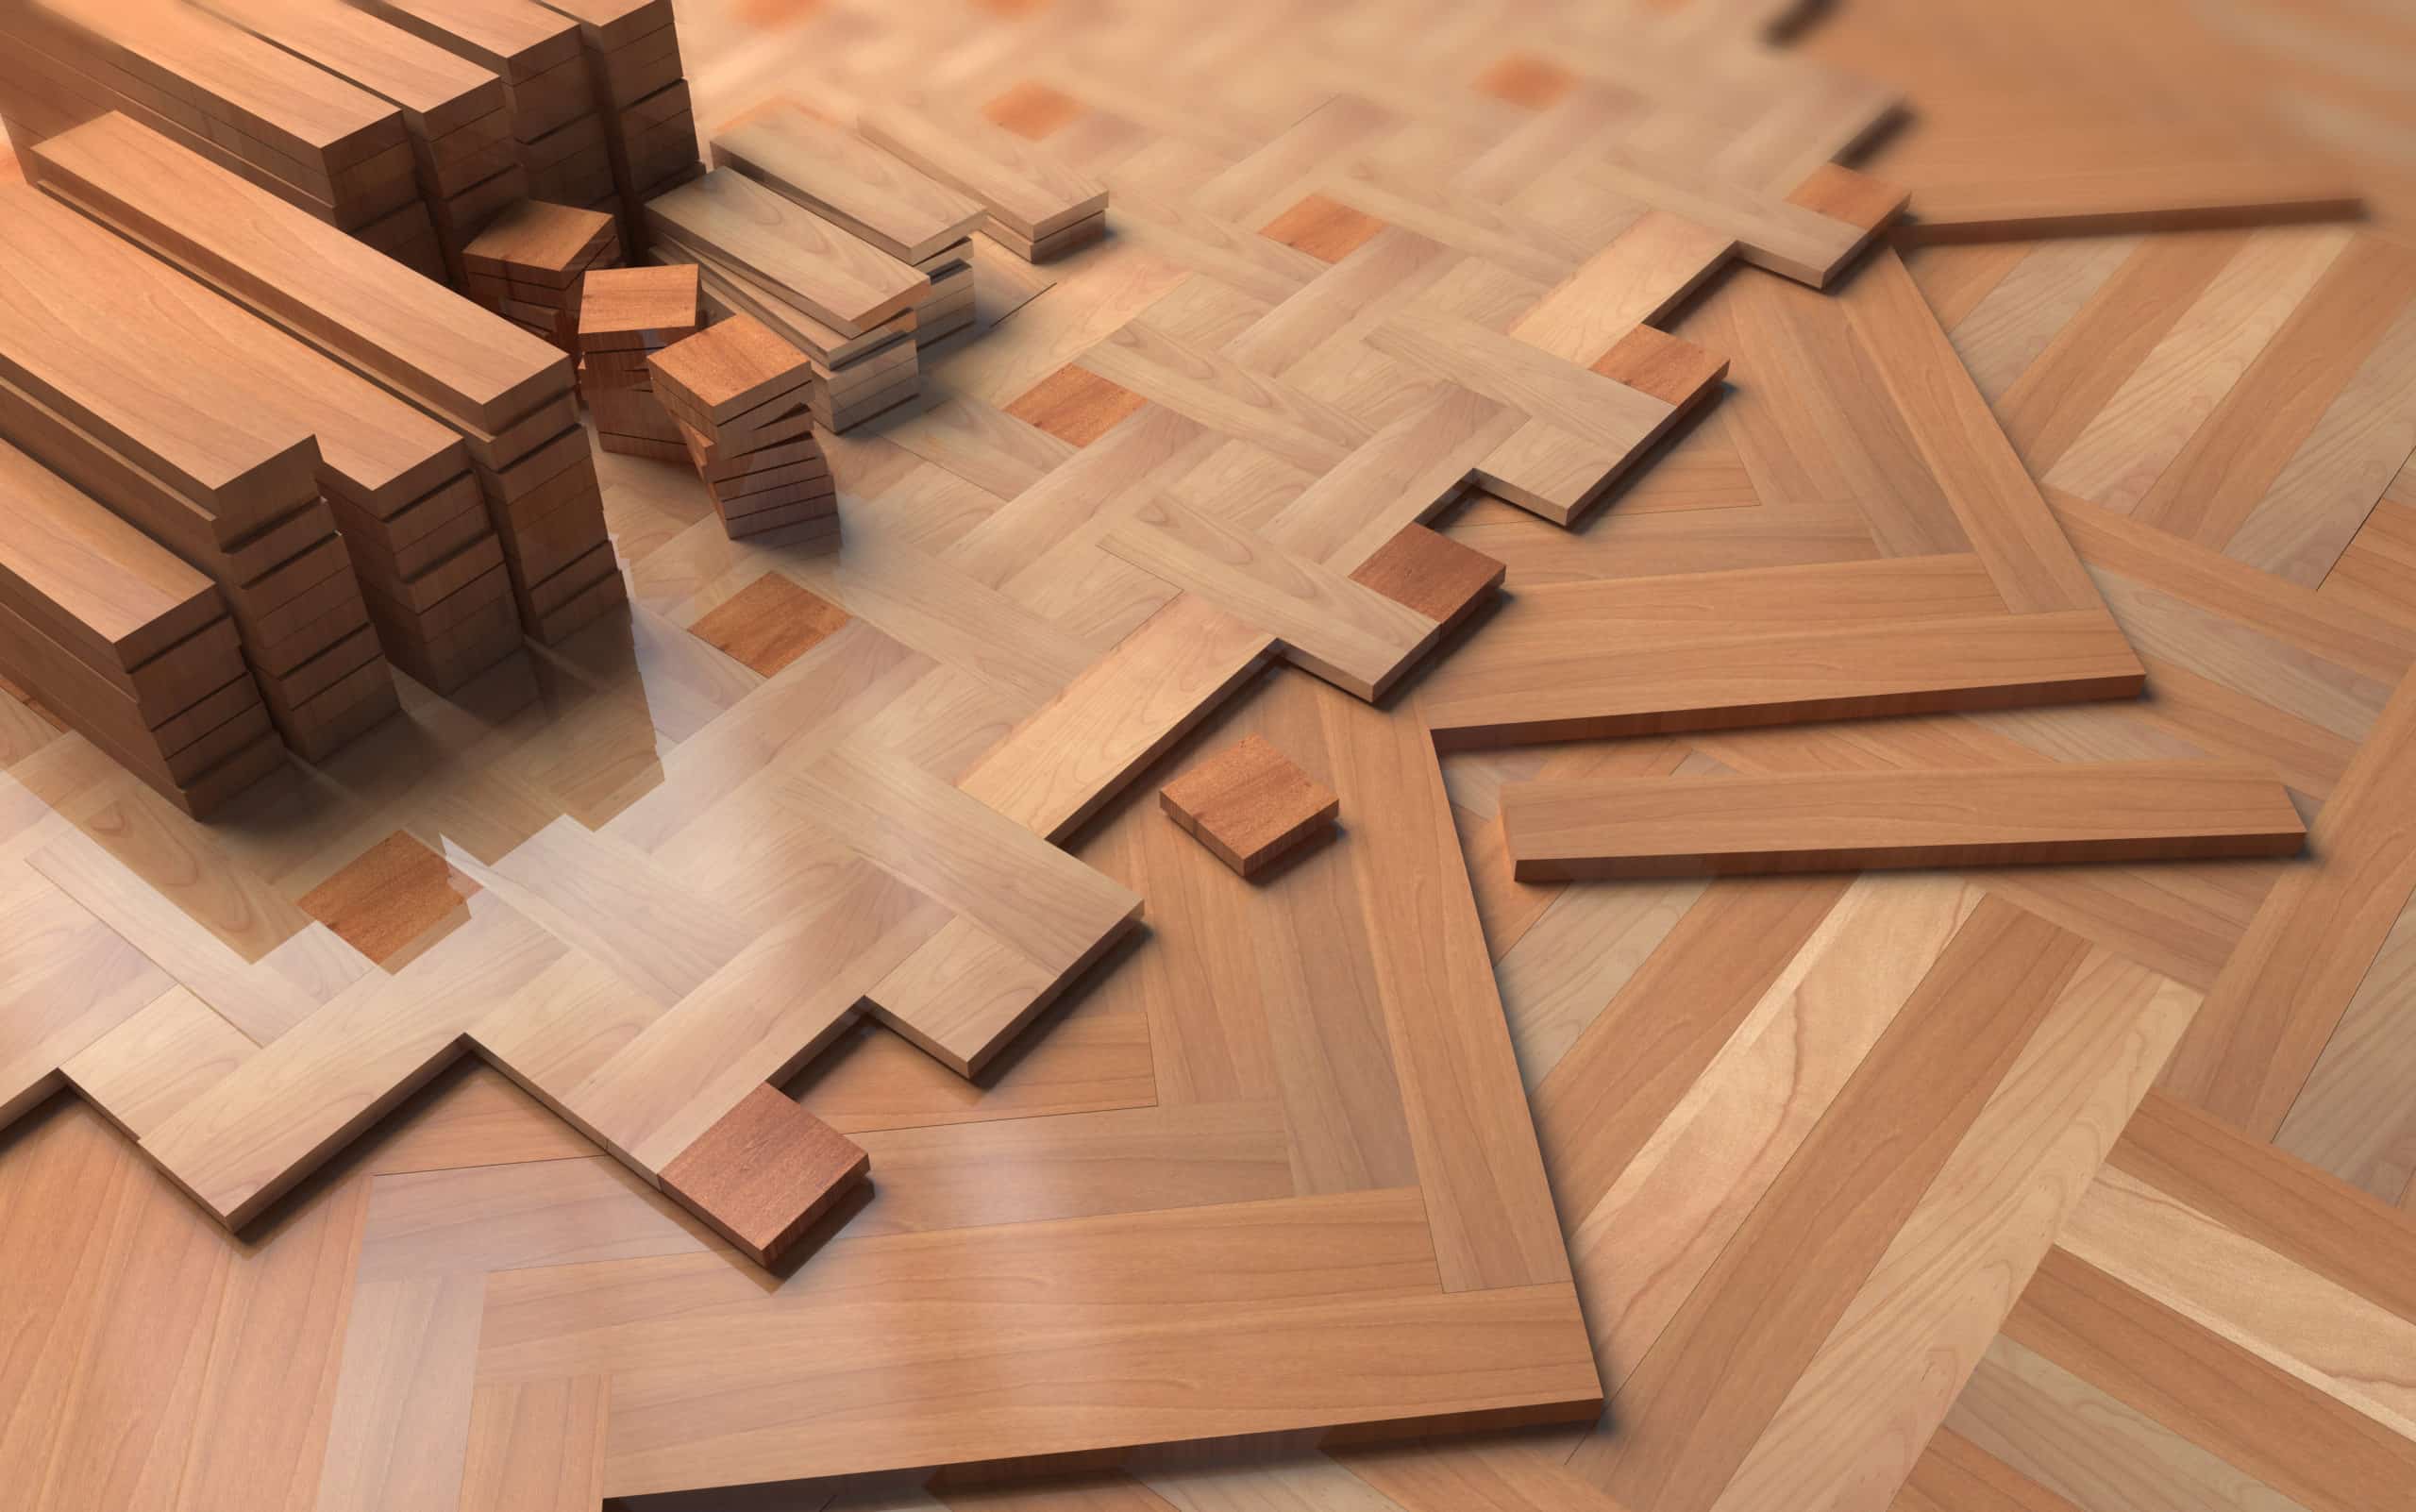 Hardwood commercial flooring tiles stacked on top of eachother based on size